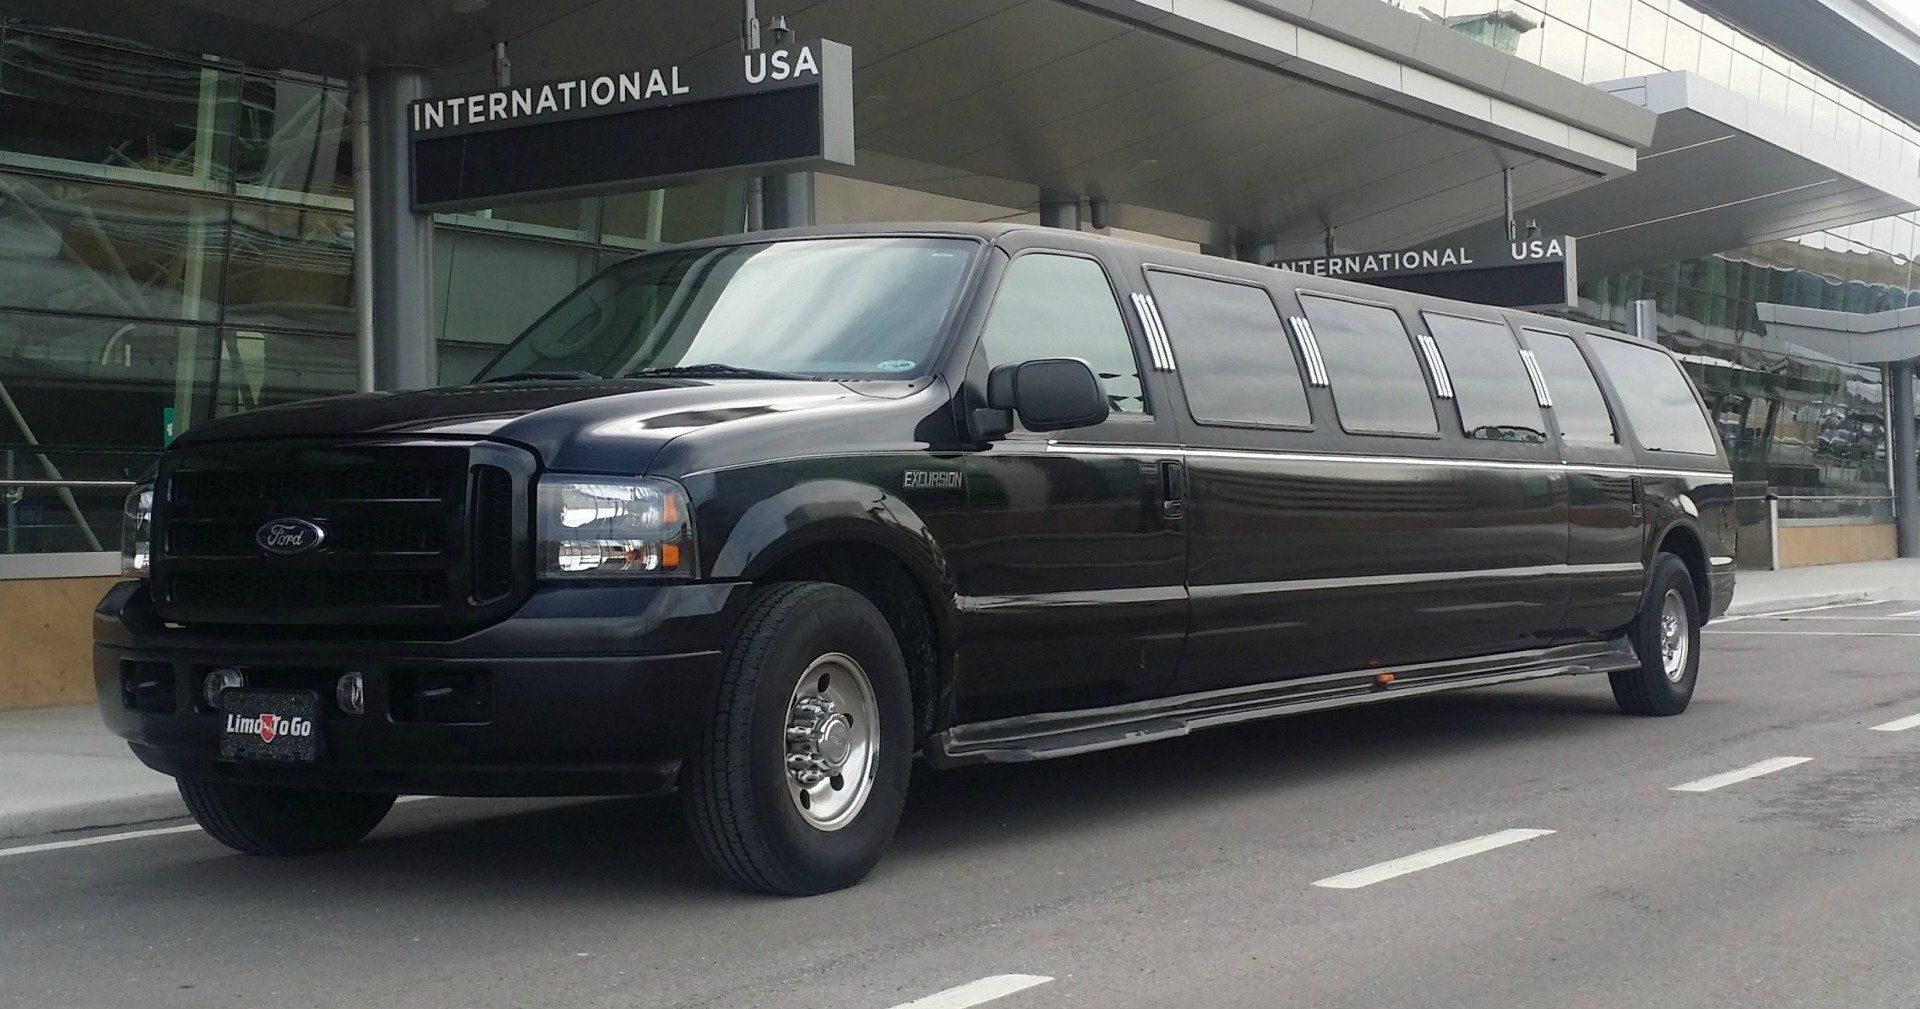 Limo To Go black stretch SUV limousine 14 passenger at airport